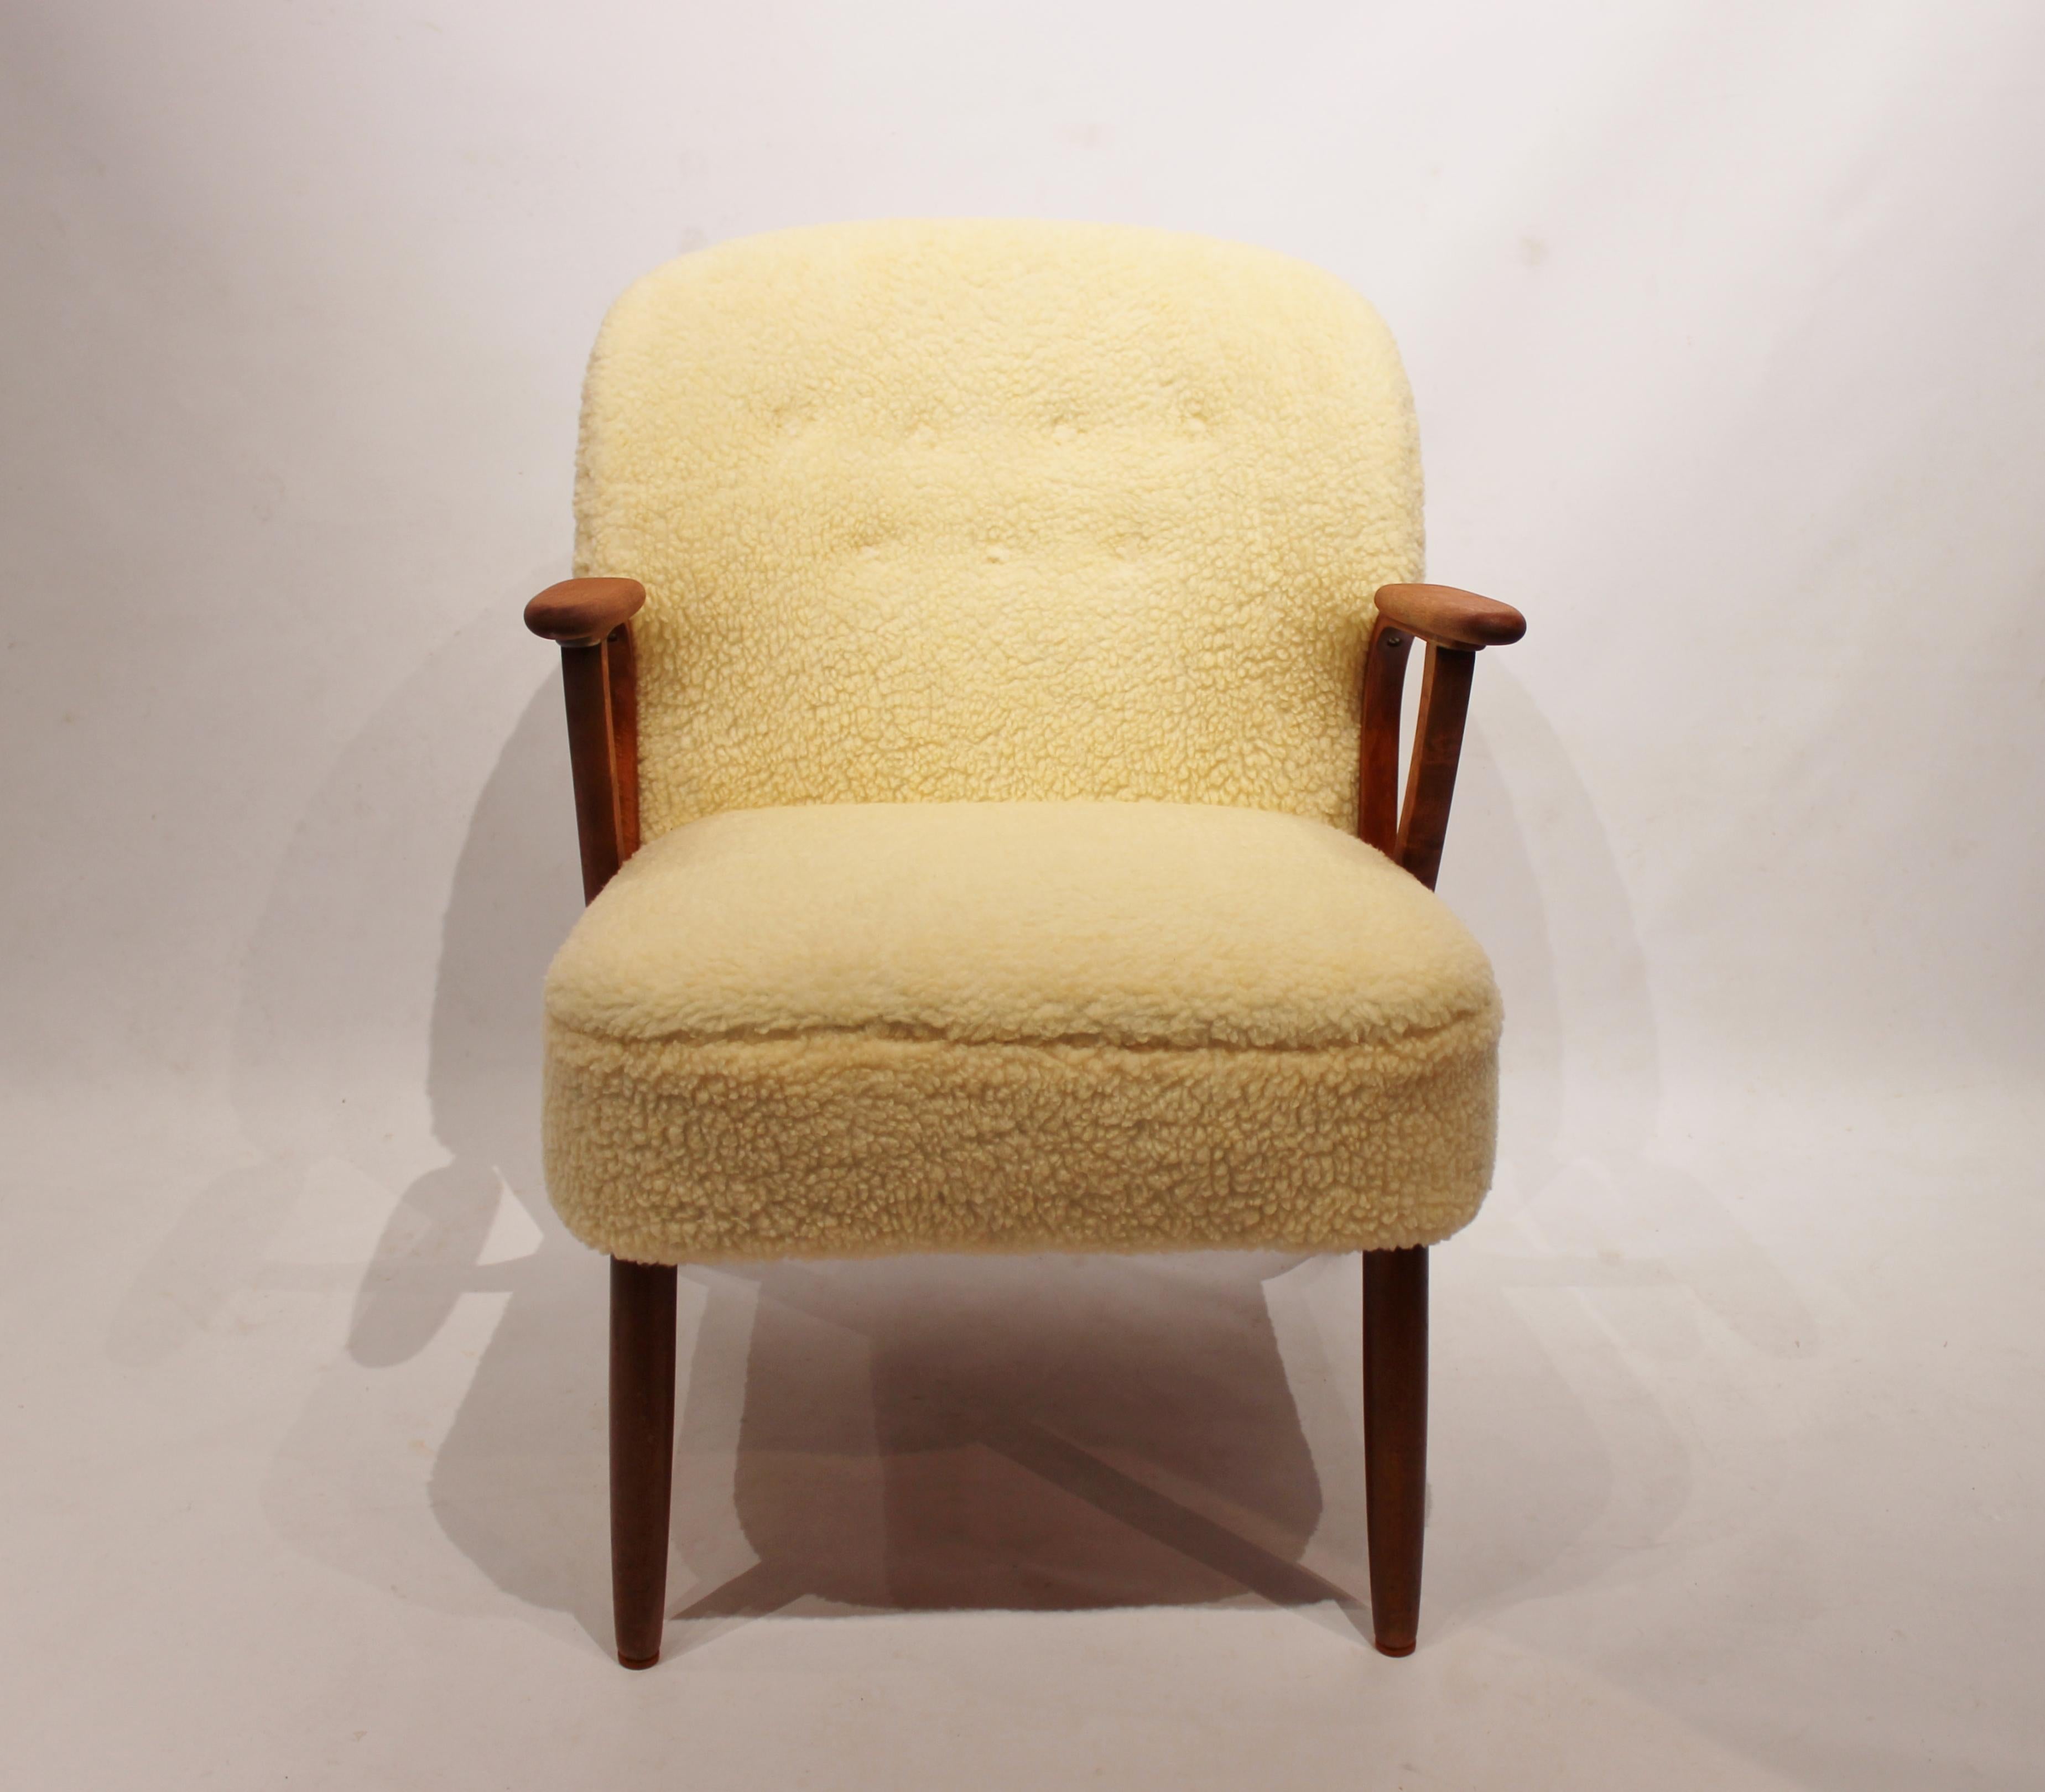 Easy chair upholstered in sheep wool and with arms of dark wood of Danish design from the 1960s. The chair is in great vintage condition.